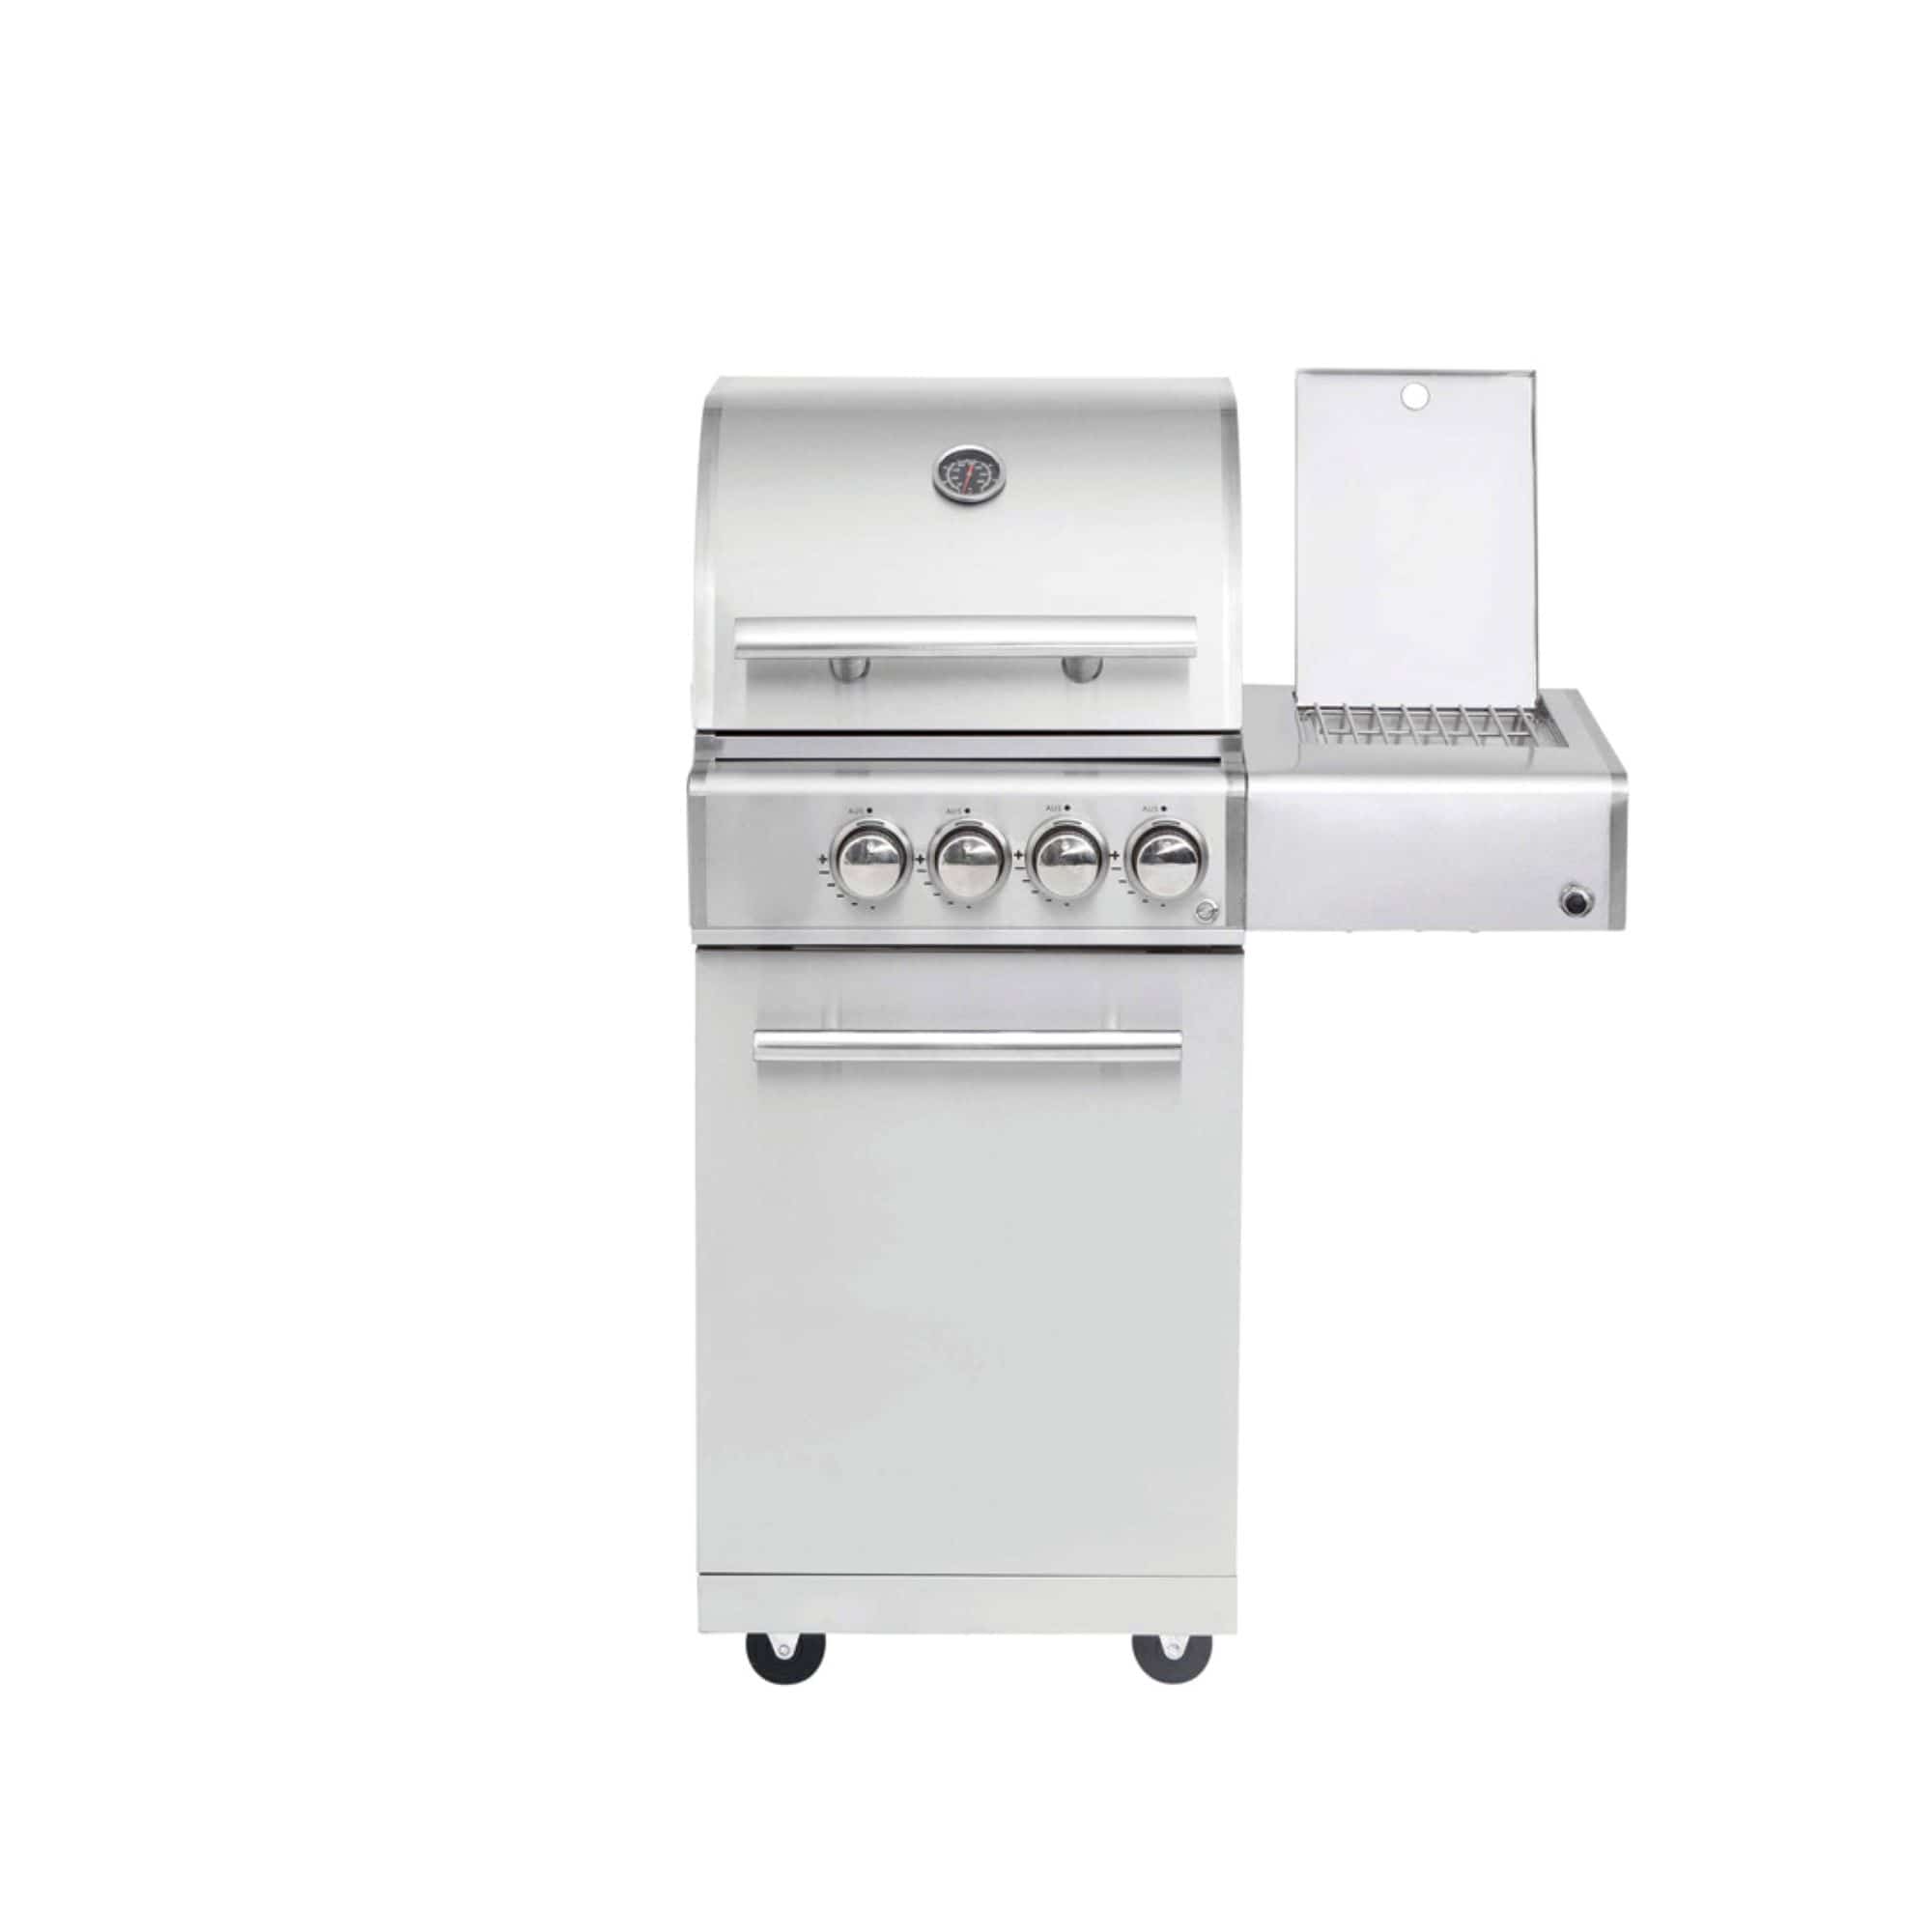 MODULAR-TOP-LINE-ALL'GRILL CHEF S